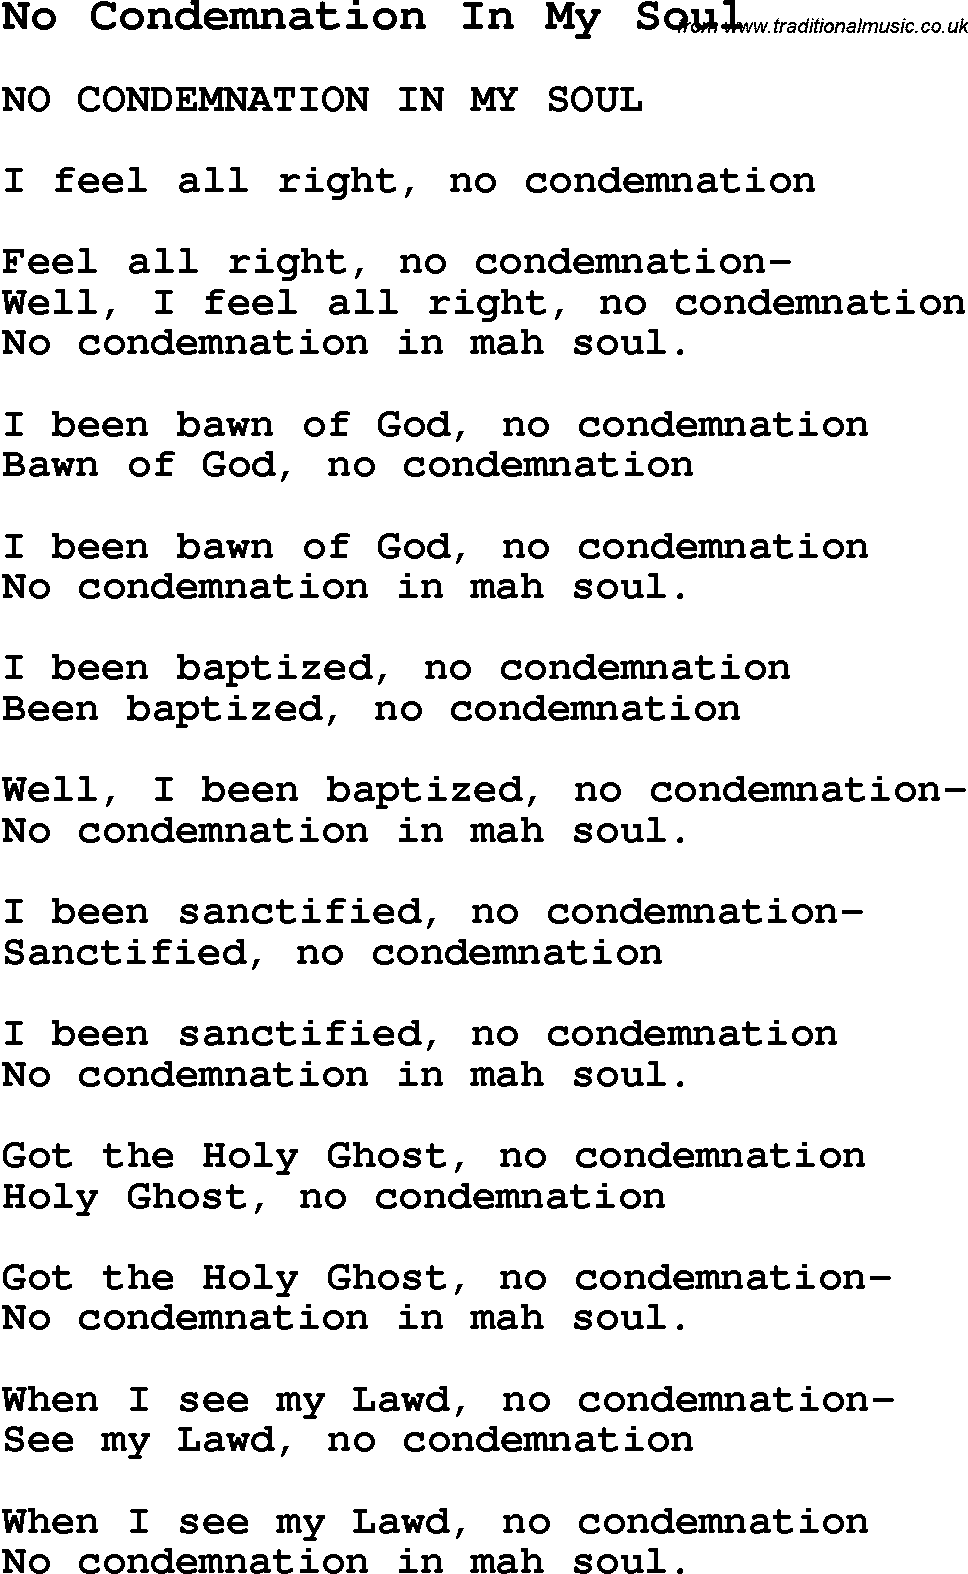 Negro Spiritual Song Lyrics for No Condemnation In My Soul